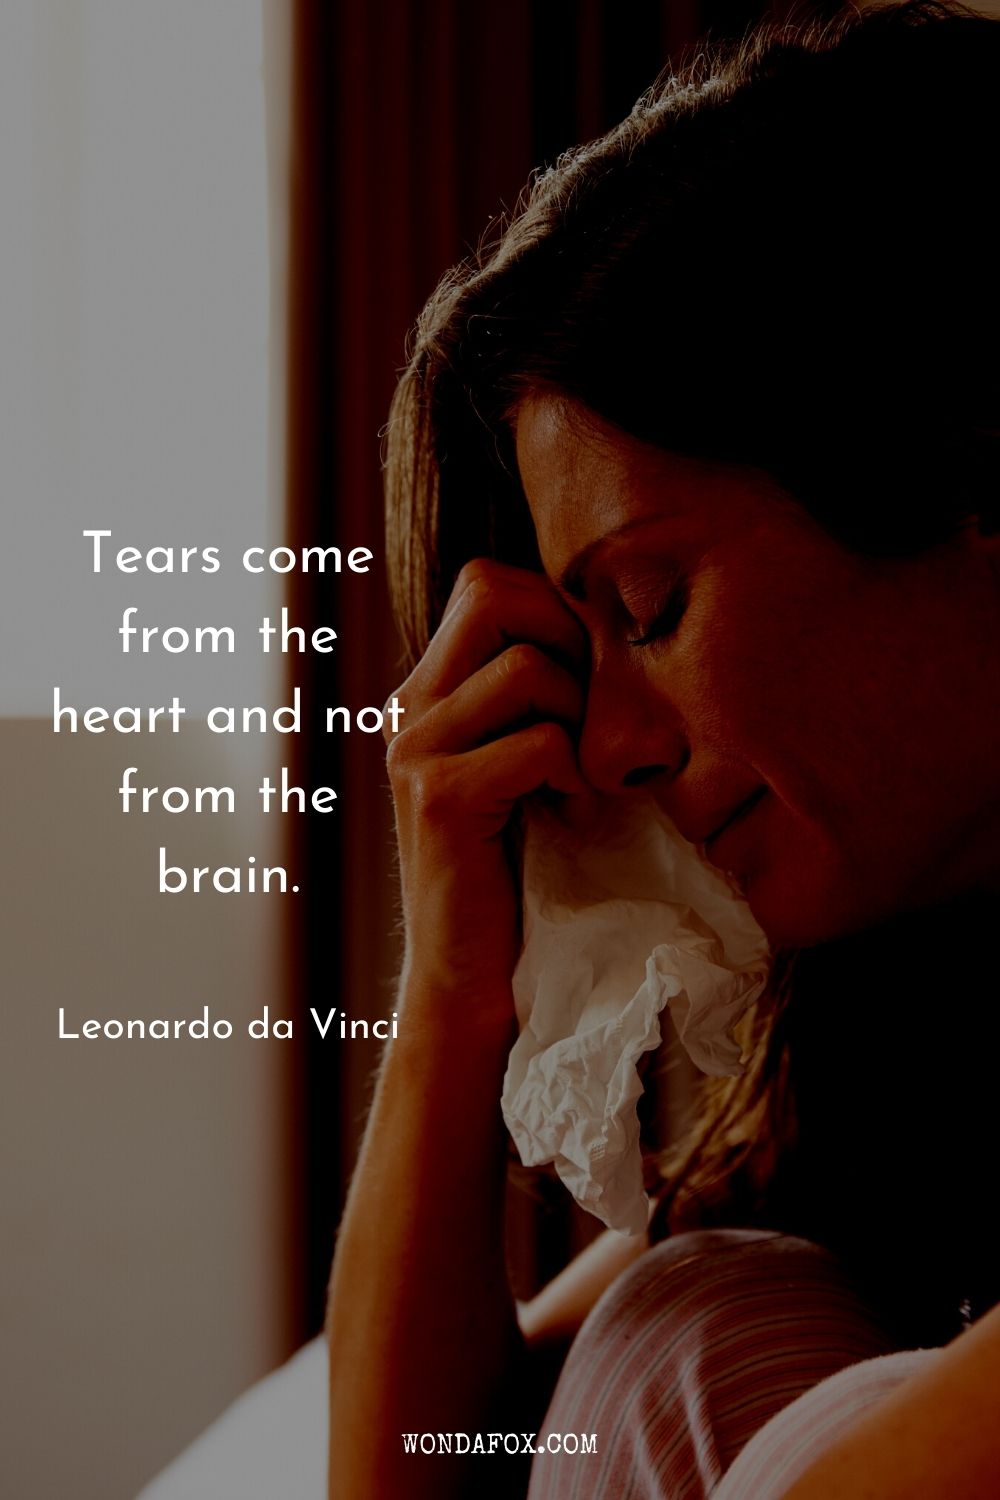 Tears come from the heart and not from the brain.